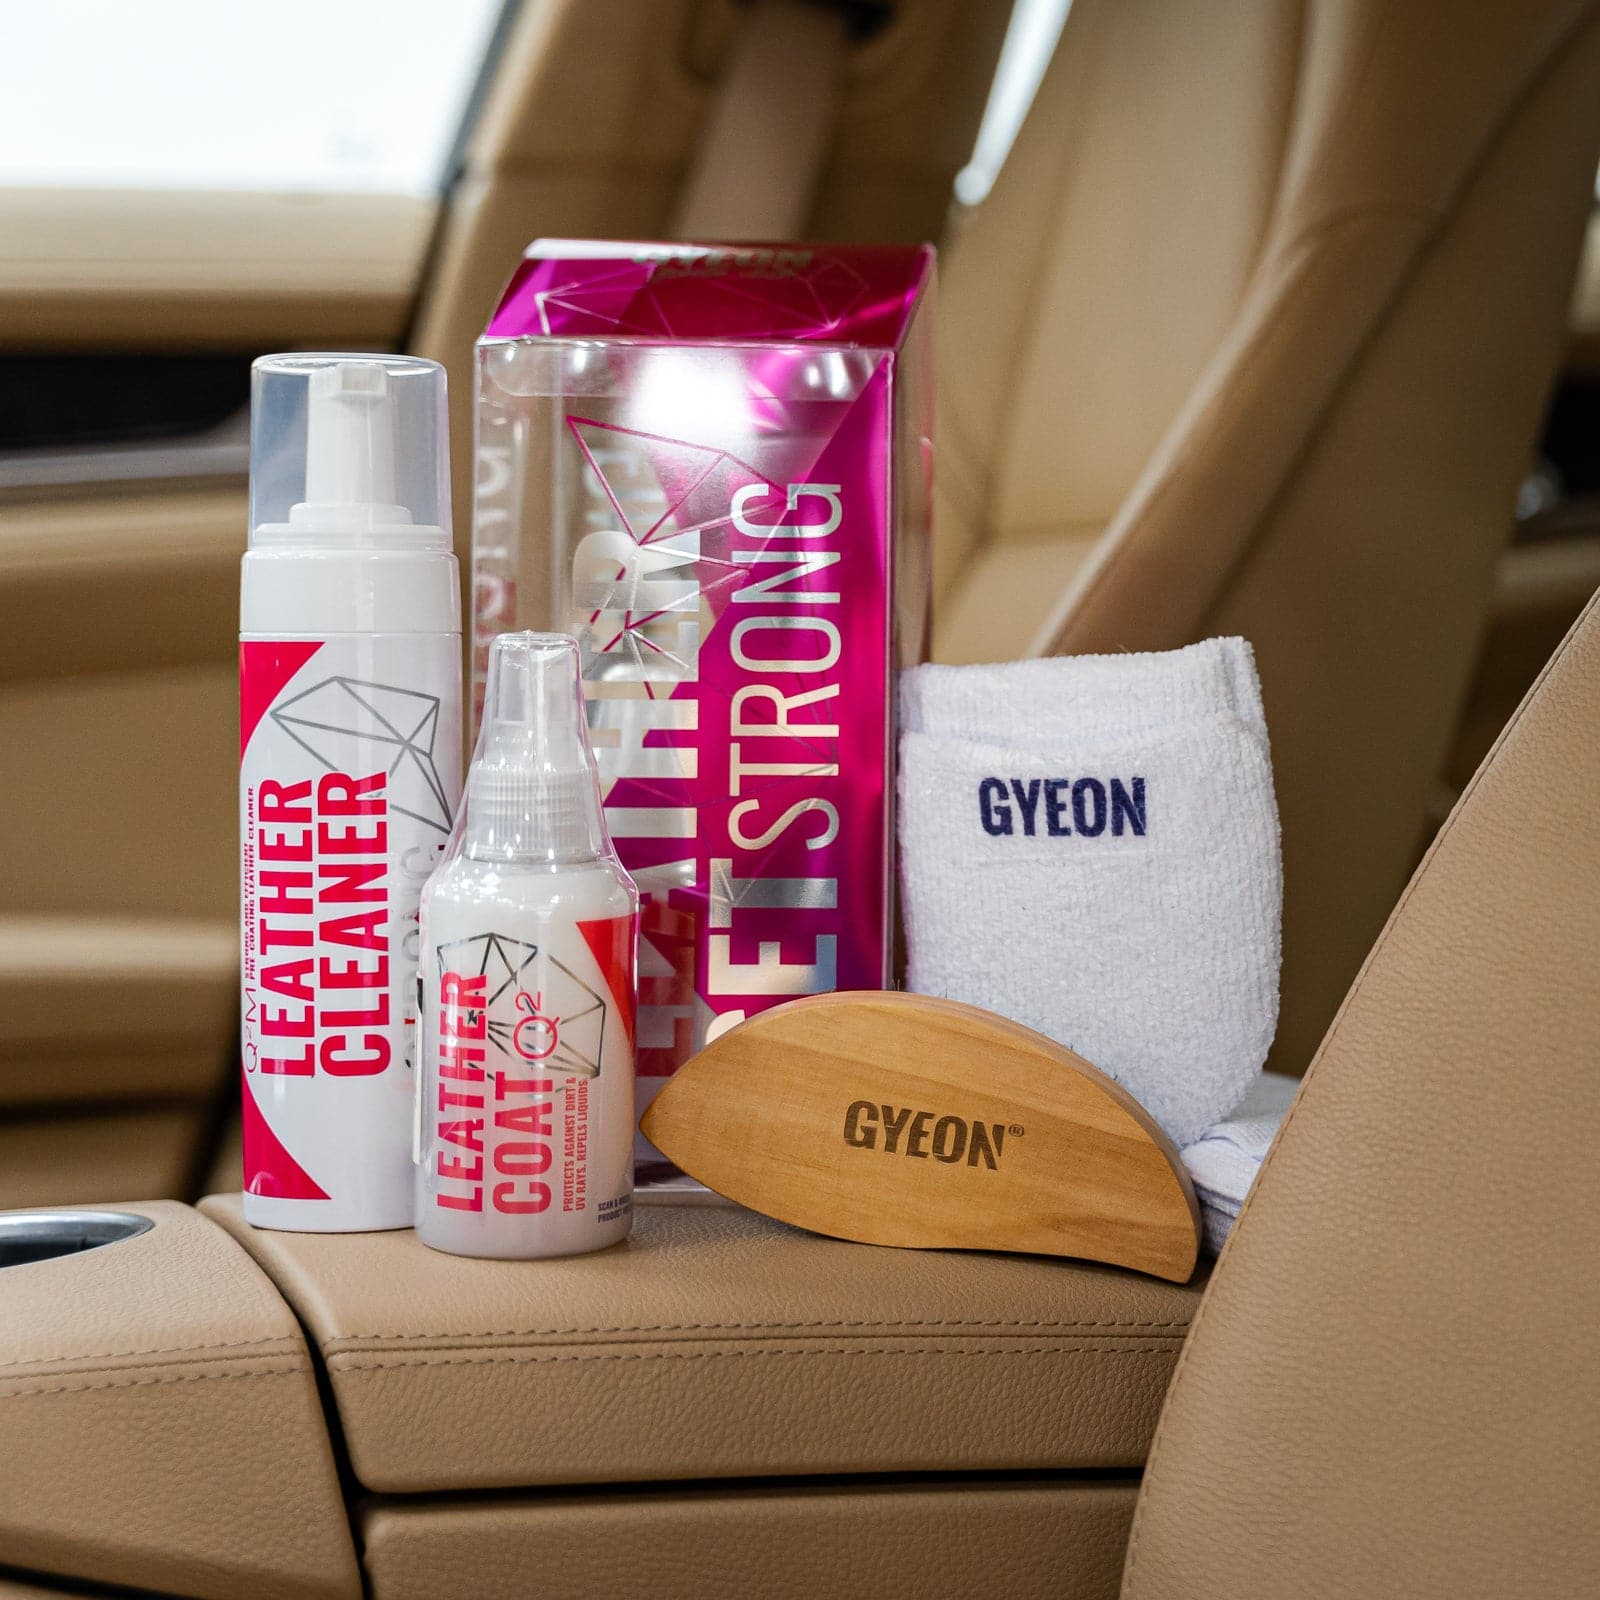 Gyeon - Q²M LEATHER CLEANER STRONG - Lederreiniger strong - 1L